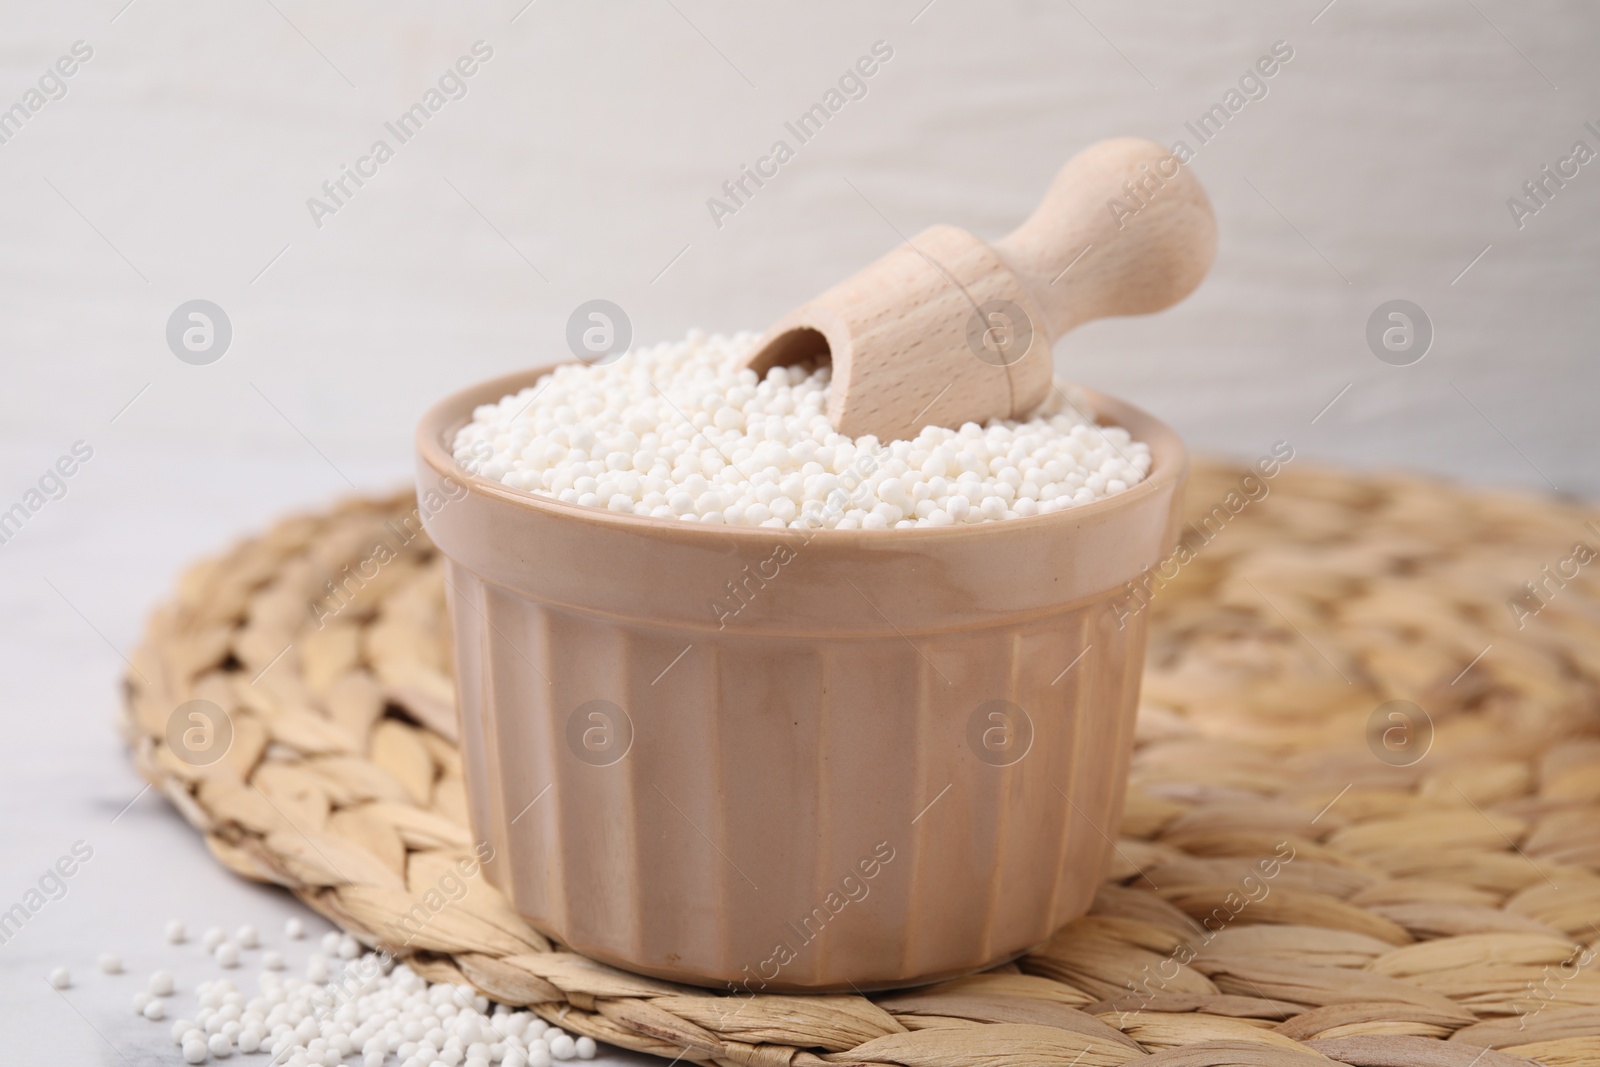 Photo of Tapioca pearls and scoop in bowl on wicker mat